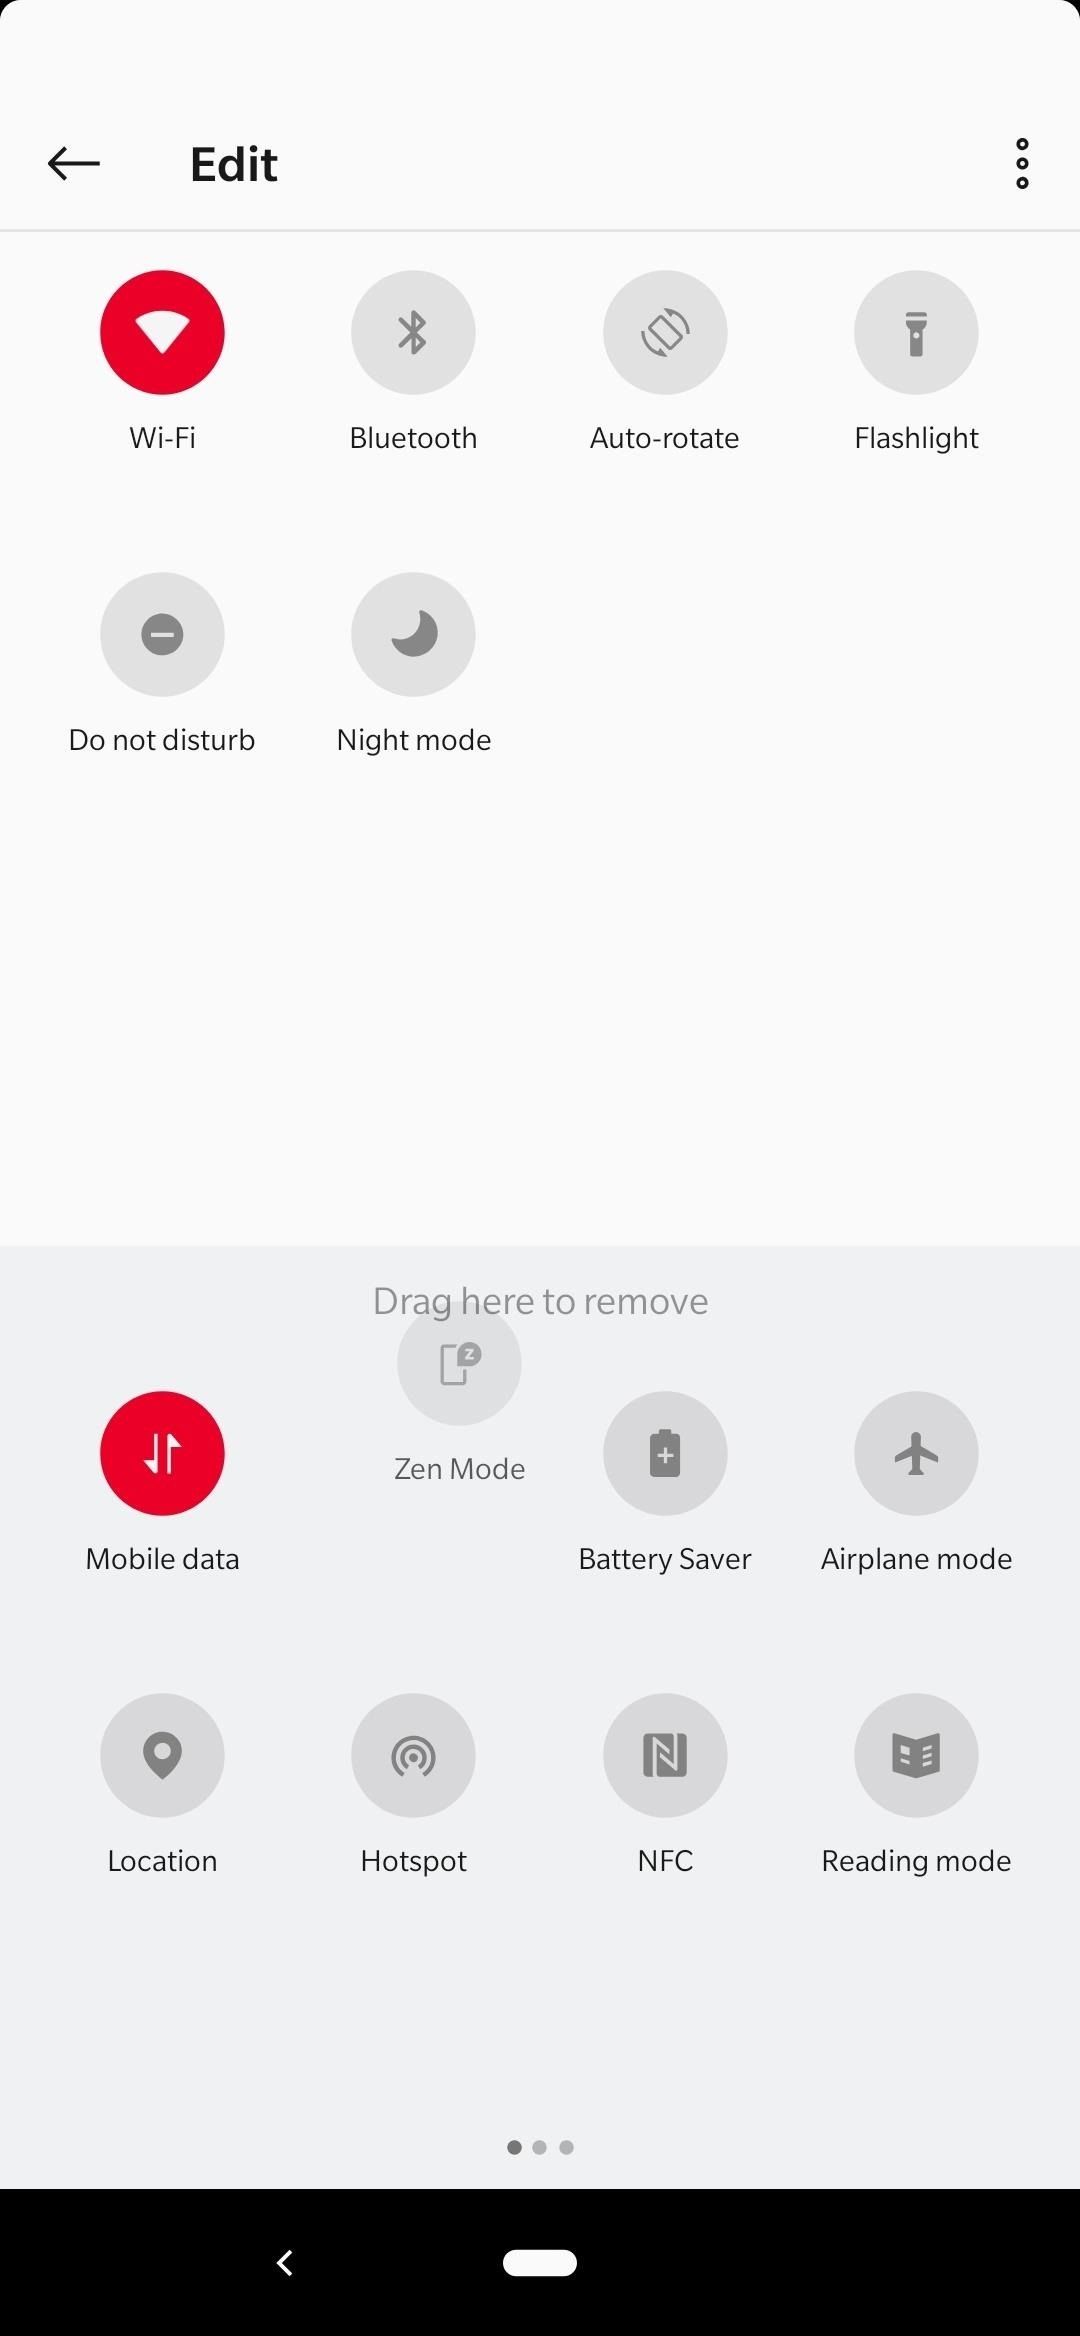 How to Enable Zen Mode on Your OnePlus 7 Pro to Help Curb Your Smartphone Addiction